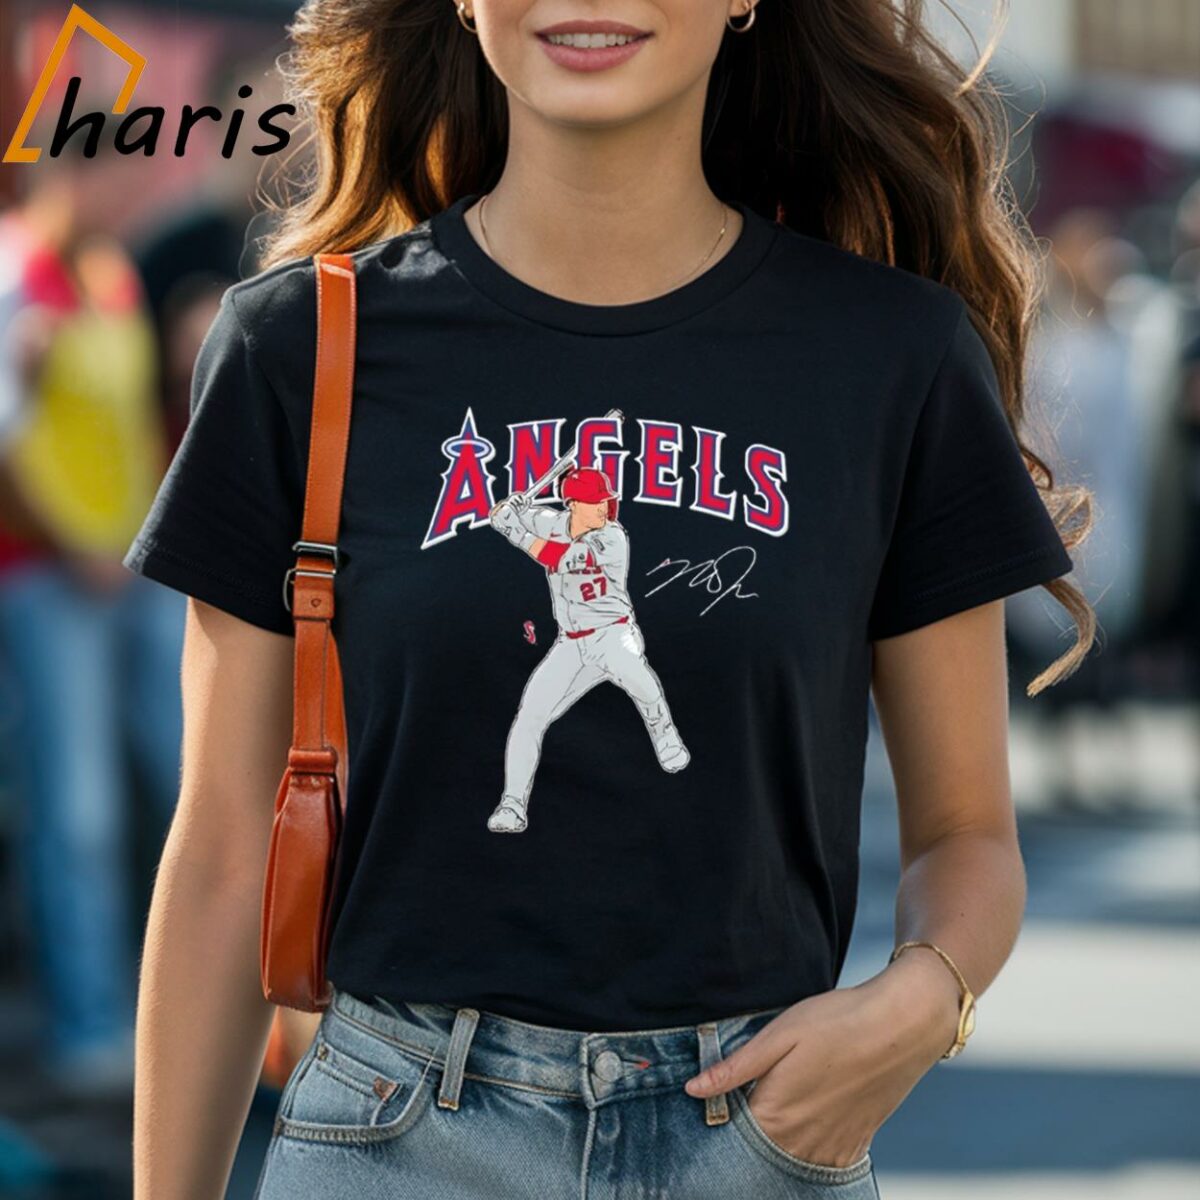 Mike Trout Los Angeles Angels Player Swing Signature Shirt 1 Shirt